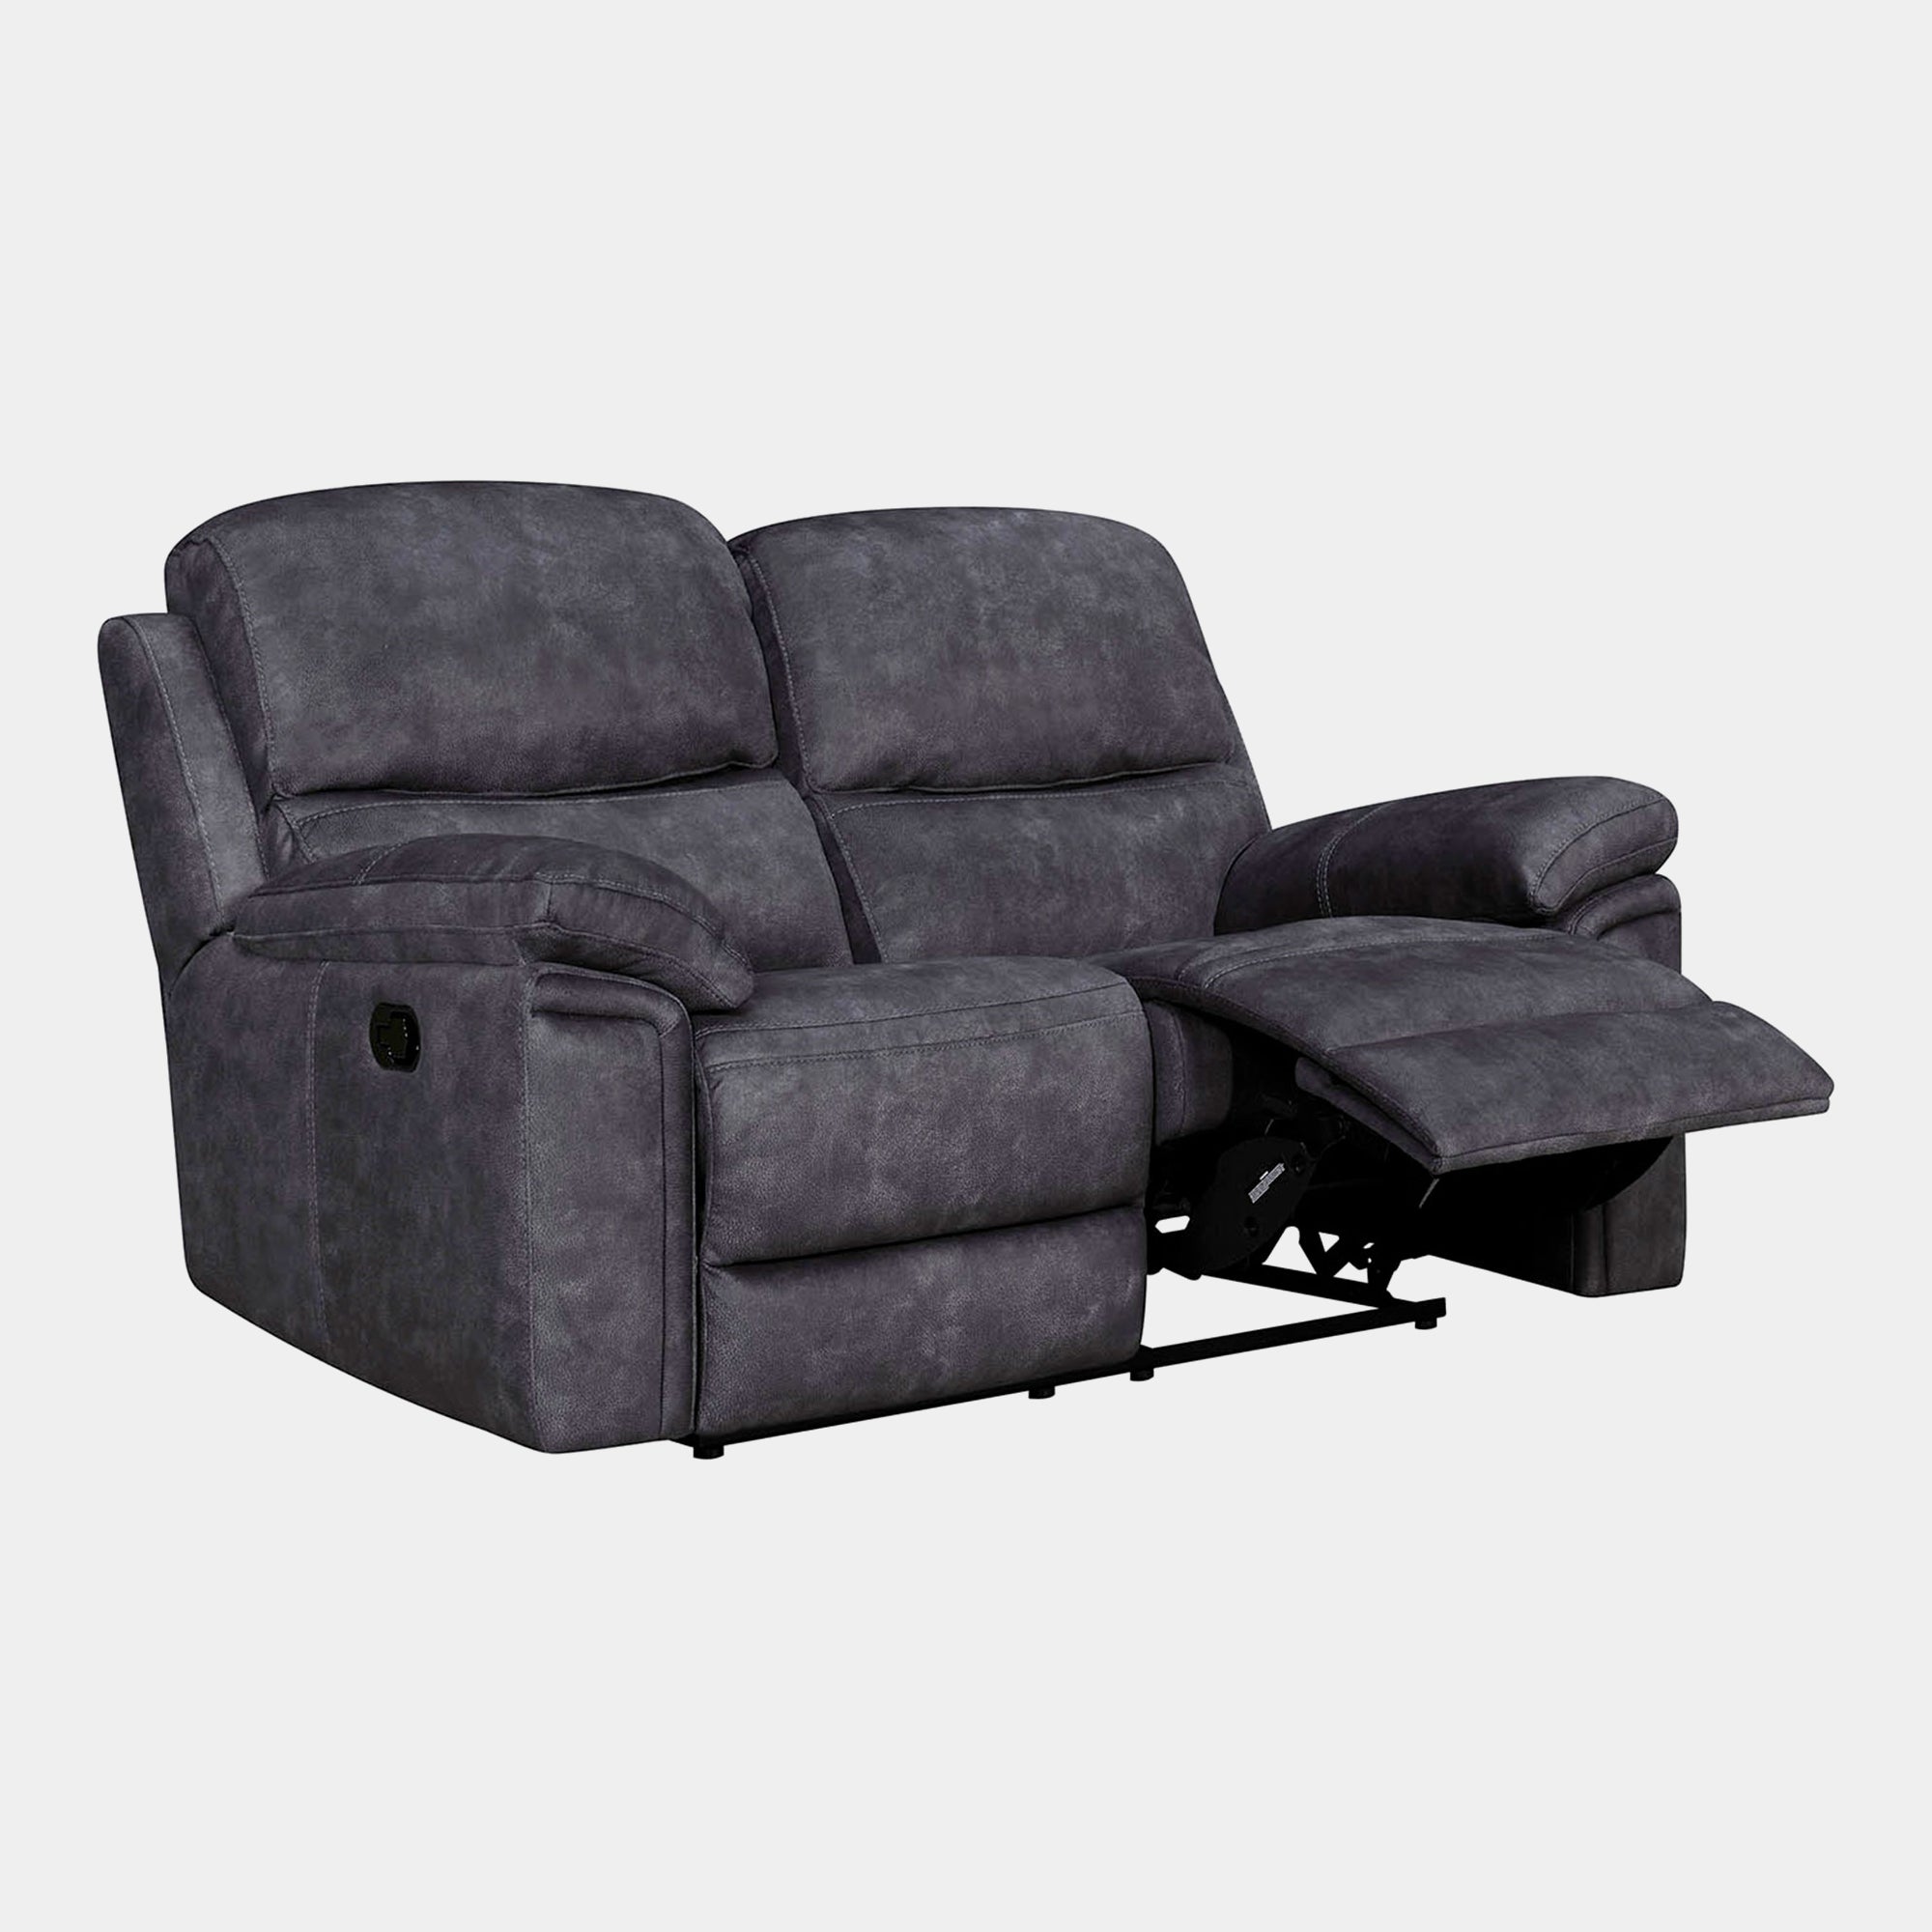 Tampa - 2 Seat 2 Power Recliner Sofa In Fabric Or Leather Fabric Grade BSF20